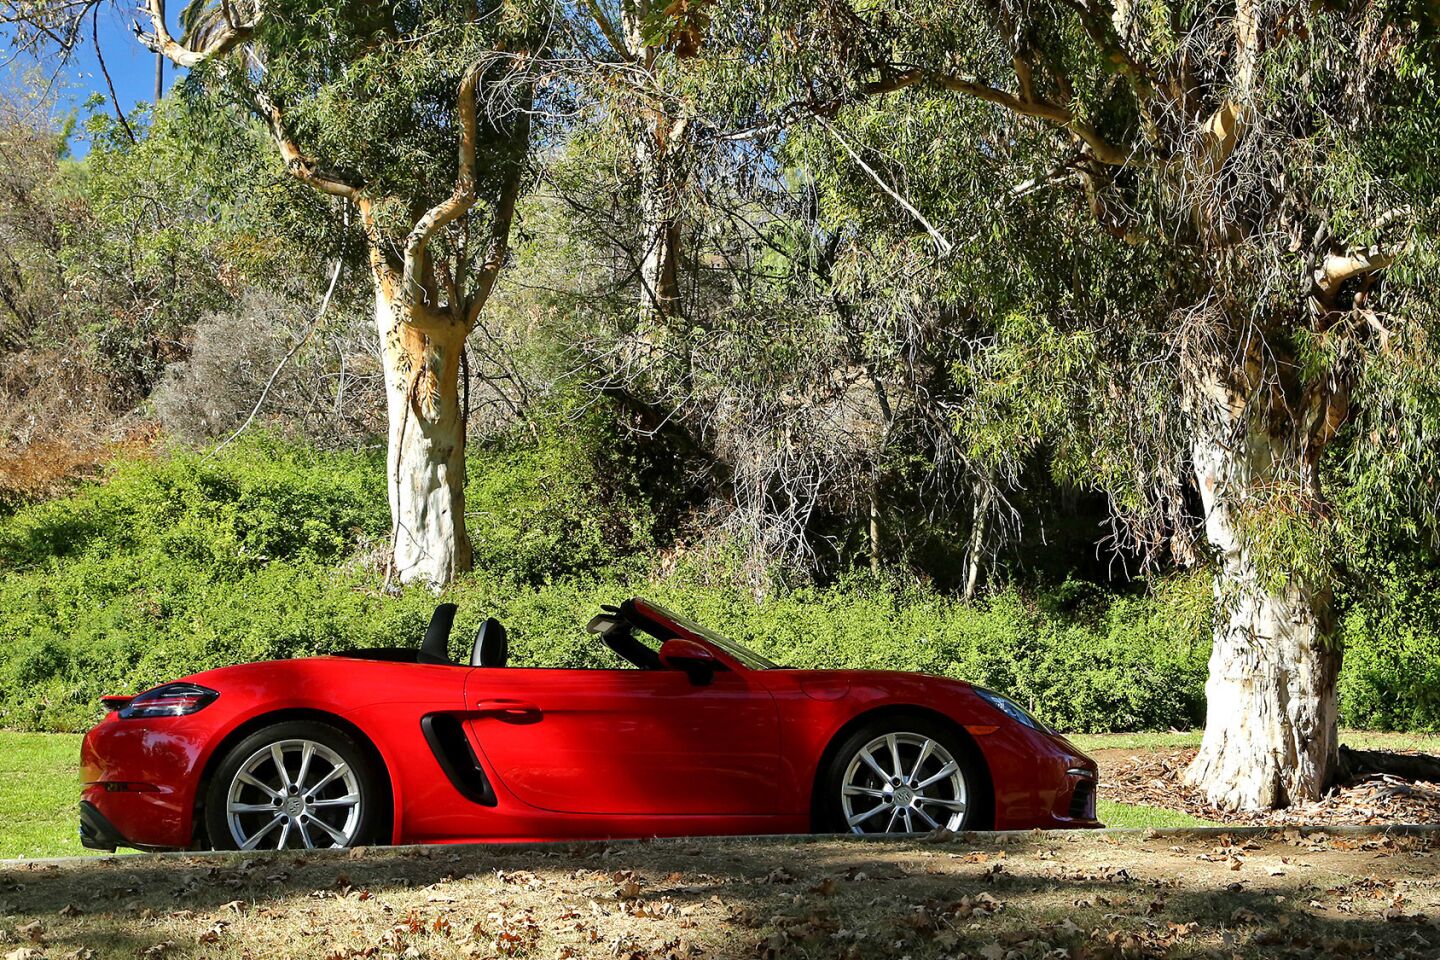 Porsche's new Boxster is fast, fun to drive and, for a Porsche, affordable  - Los Angeles Times